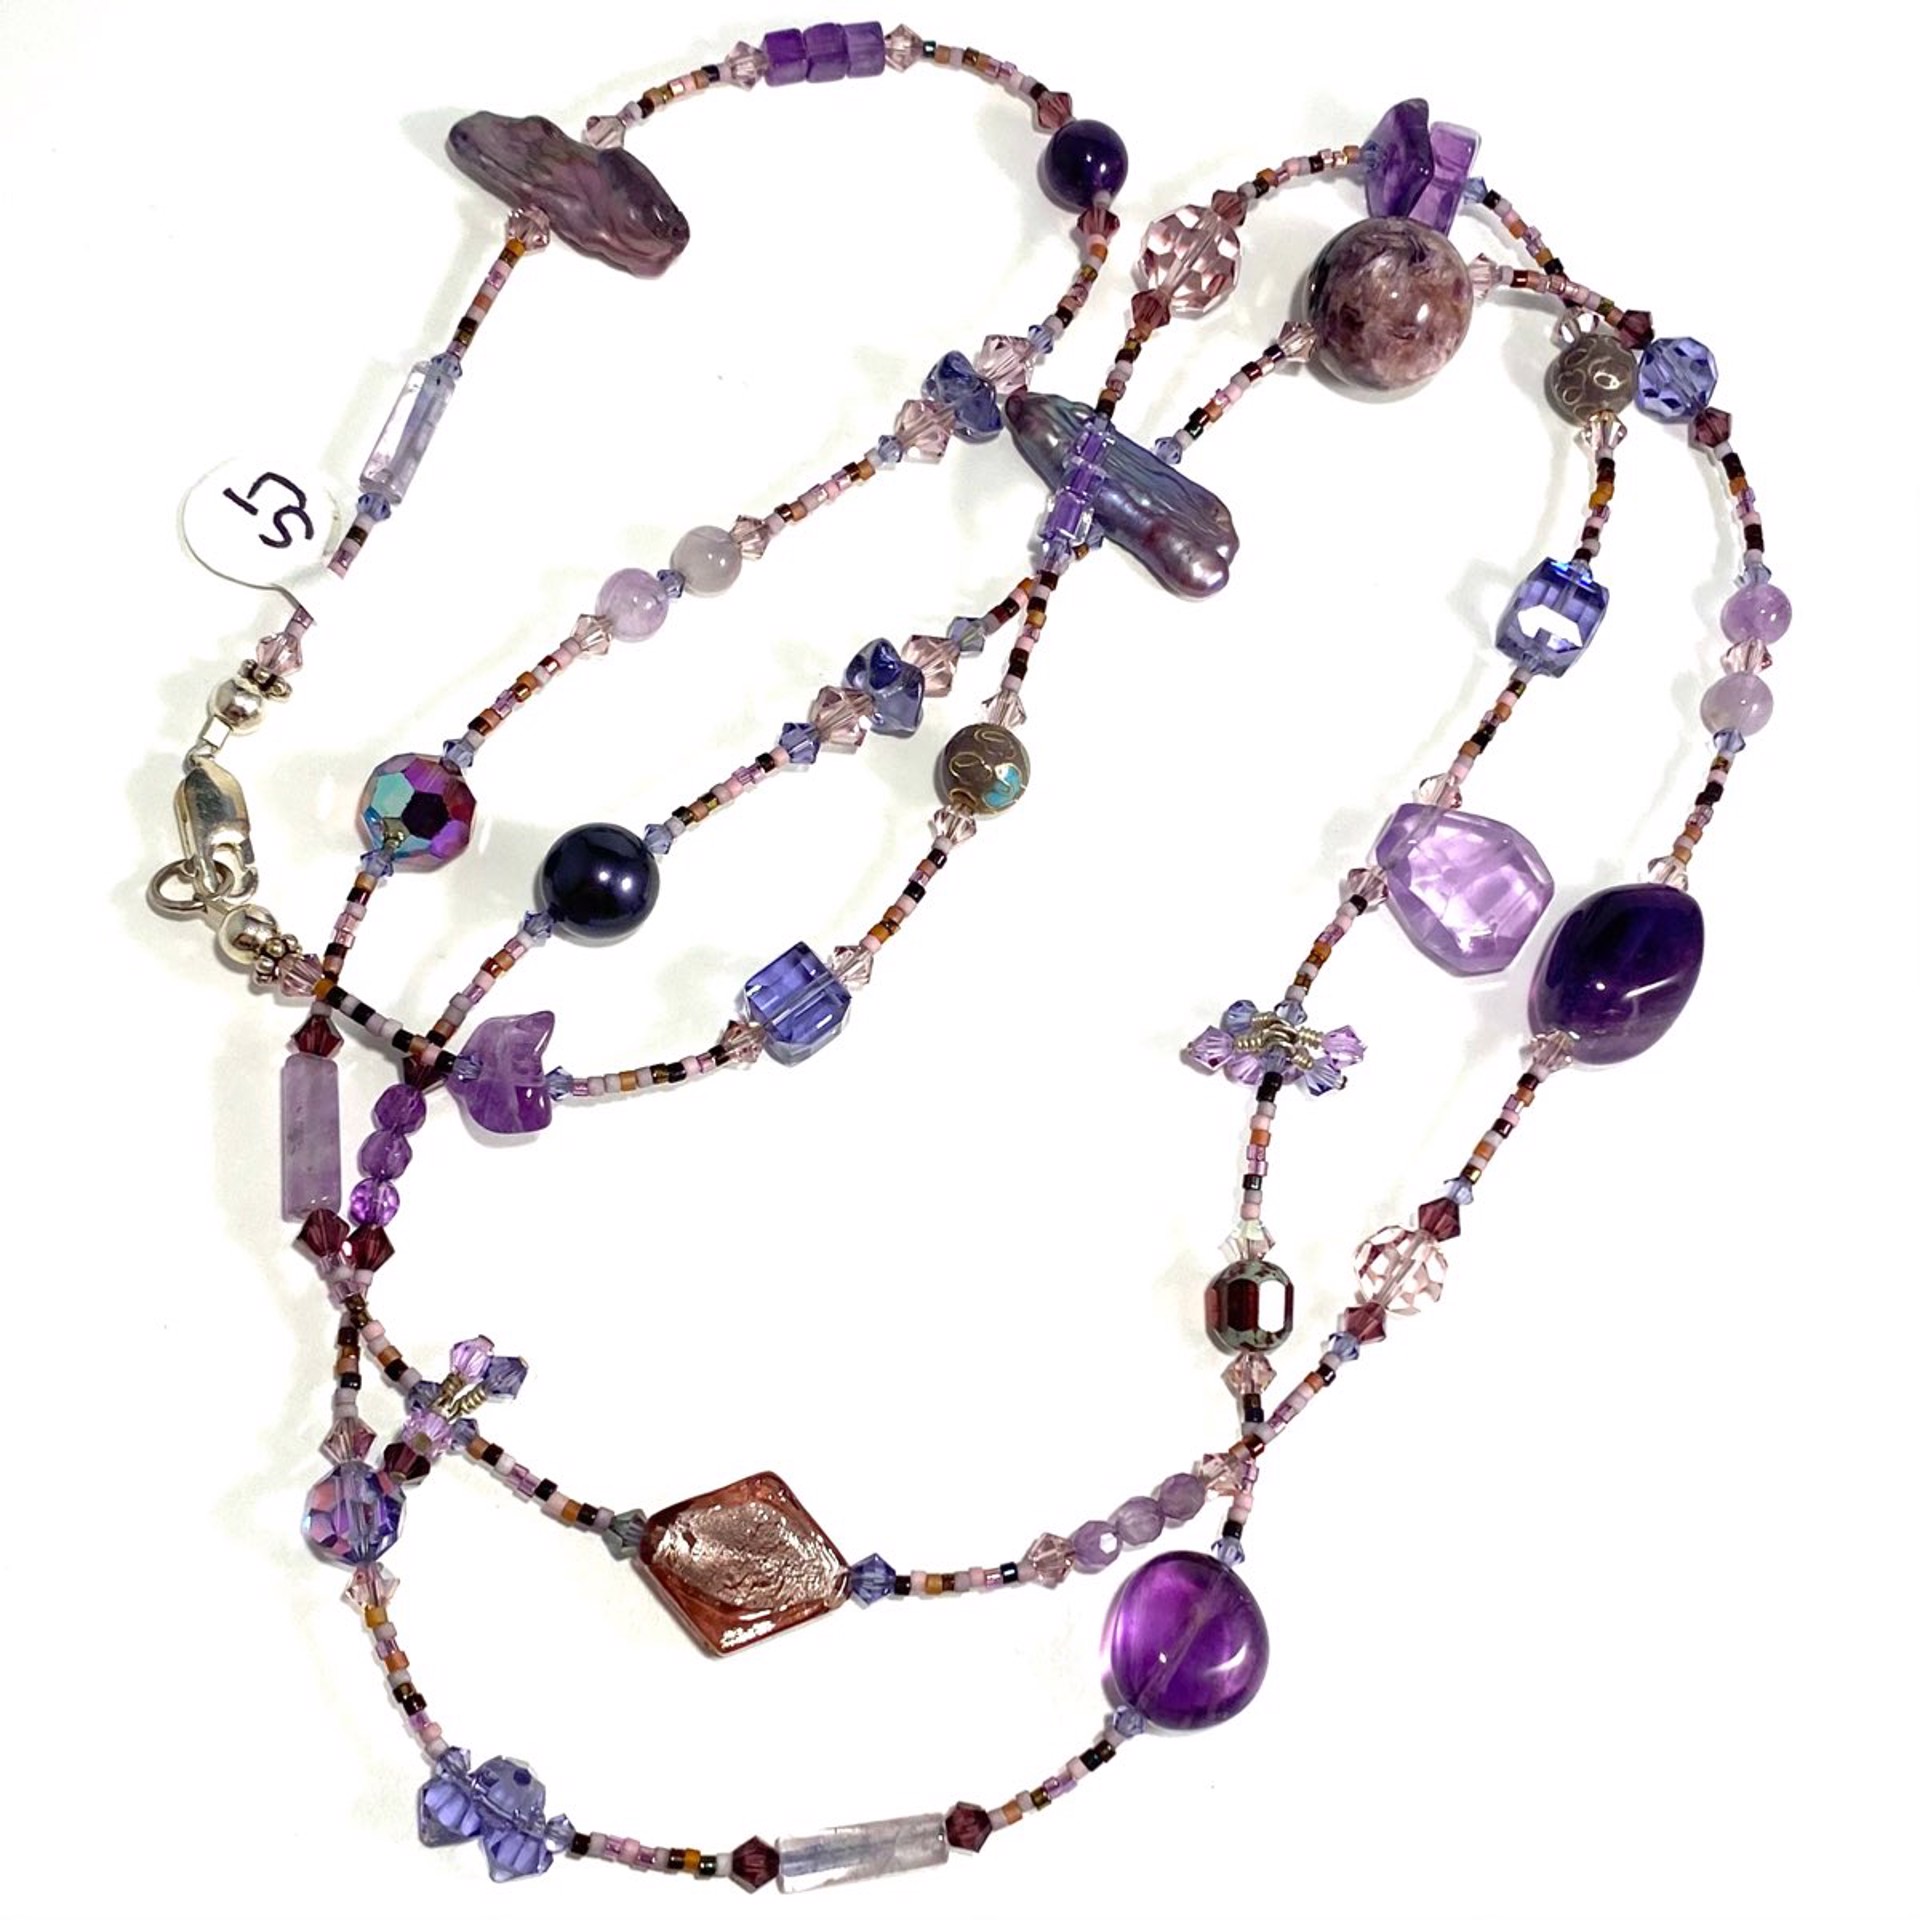 Amethyst, Charoite and Crystal "Shades of Purple Stiletto" 42” Necklace SHOSH22-5 by Shoshannah Weinisch